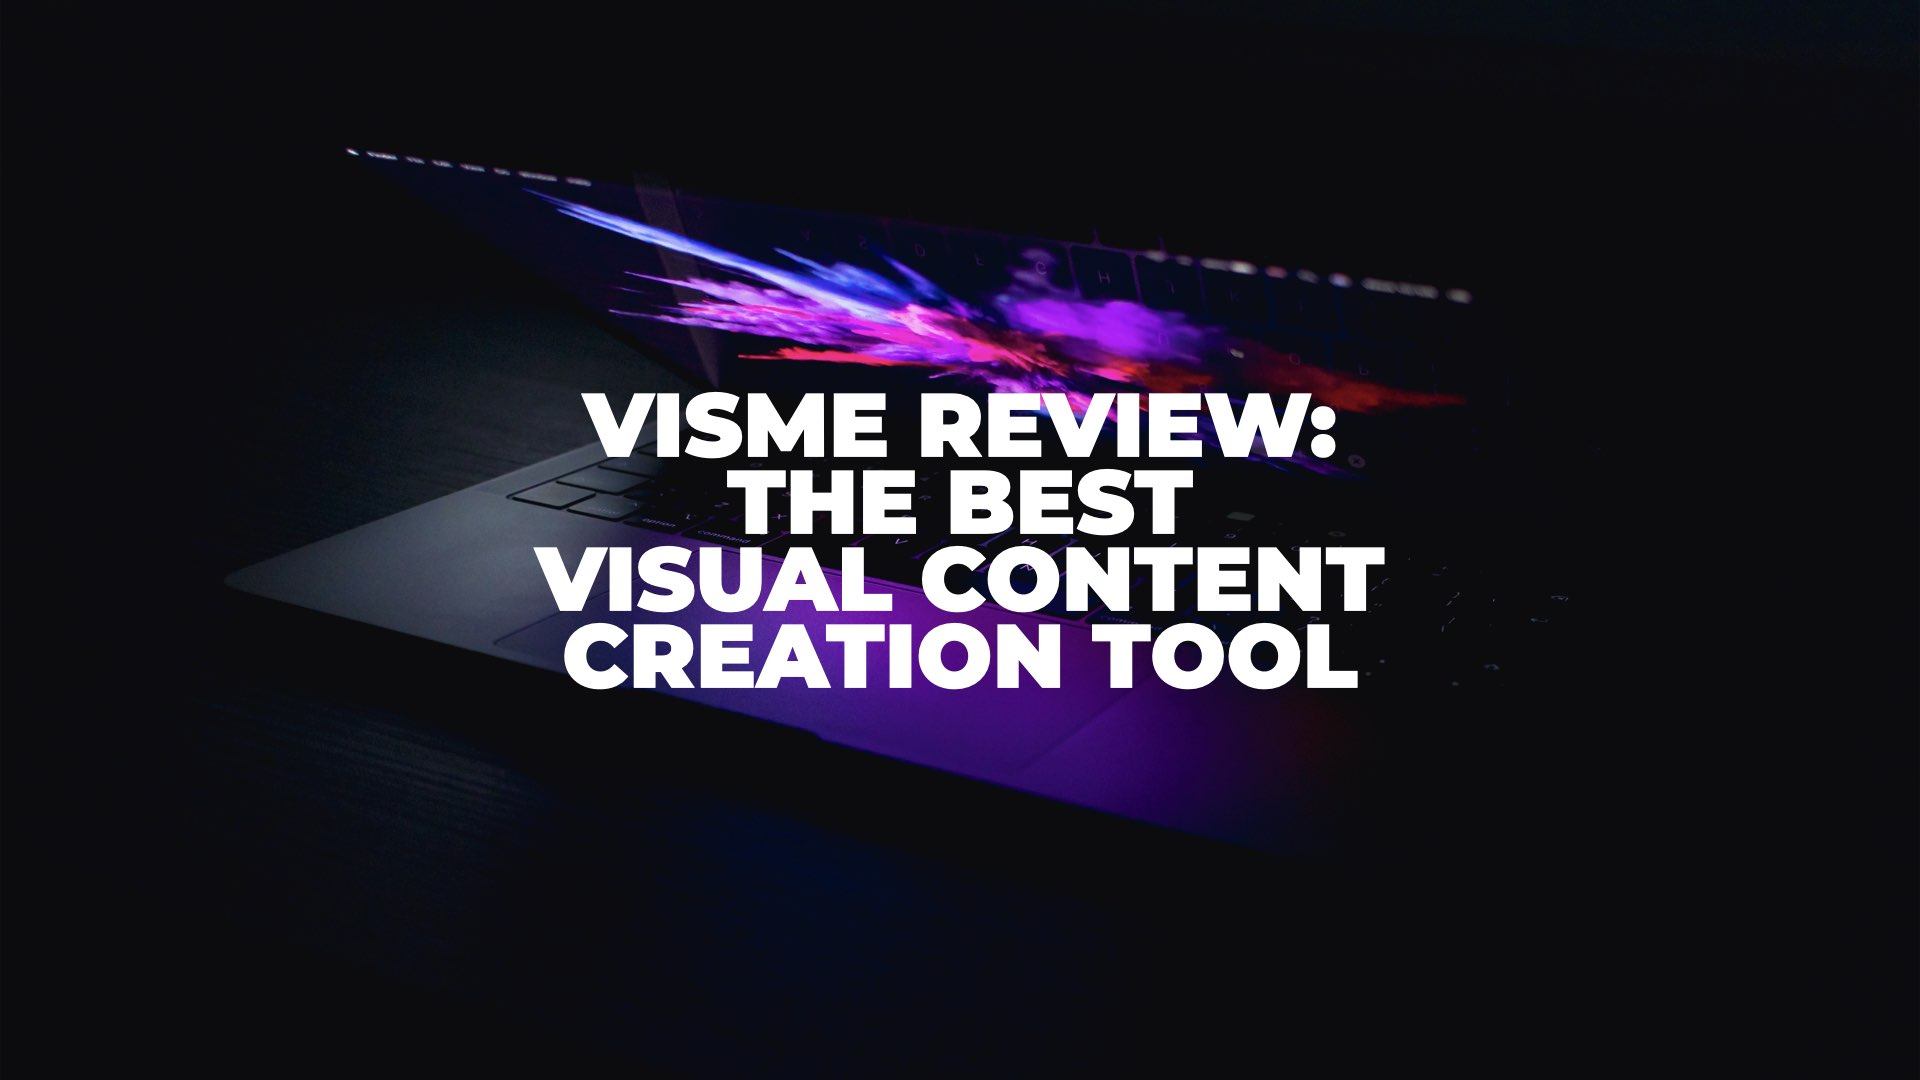 Visme Review - Featured Image